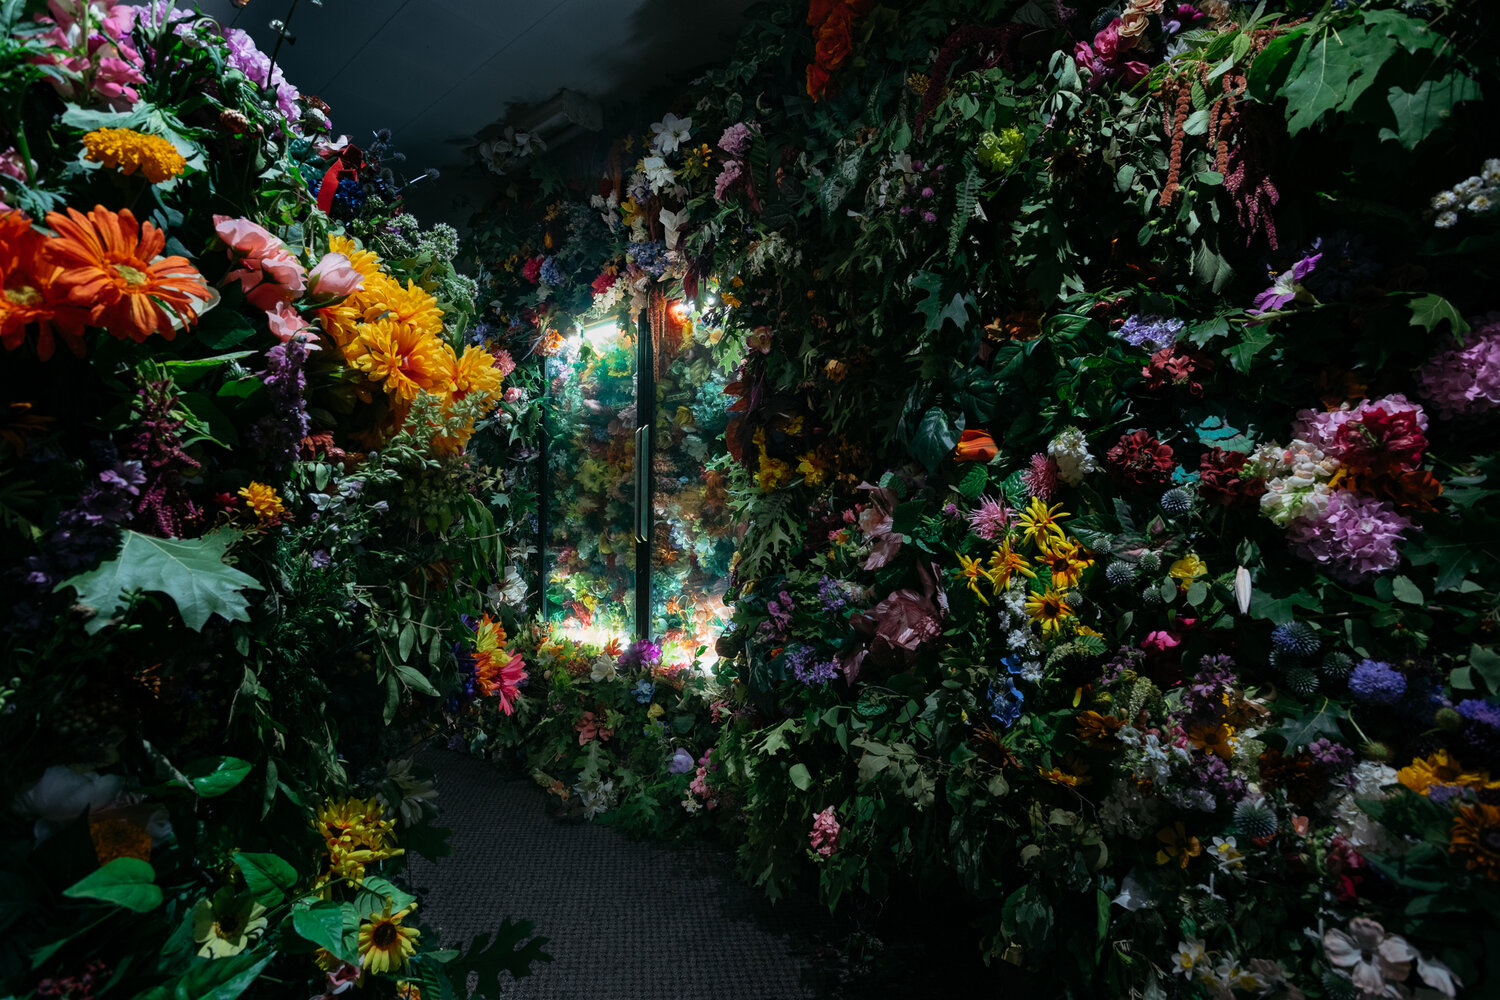 This Party Store Is Overrun by Thousands of Fresh-Cut and Artificial Flowers  - Lisa Waud on Thursd - party+store+12